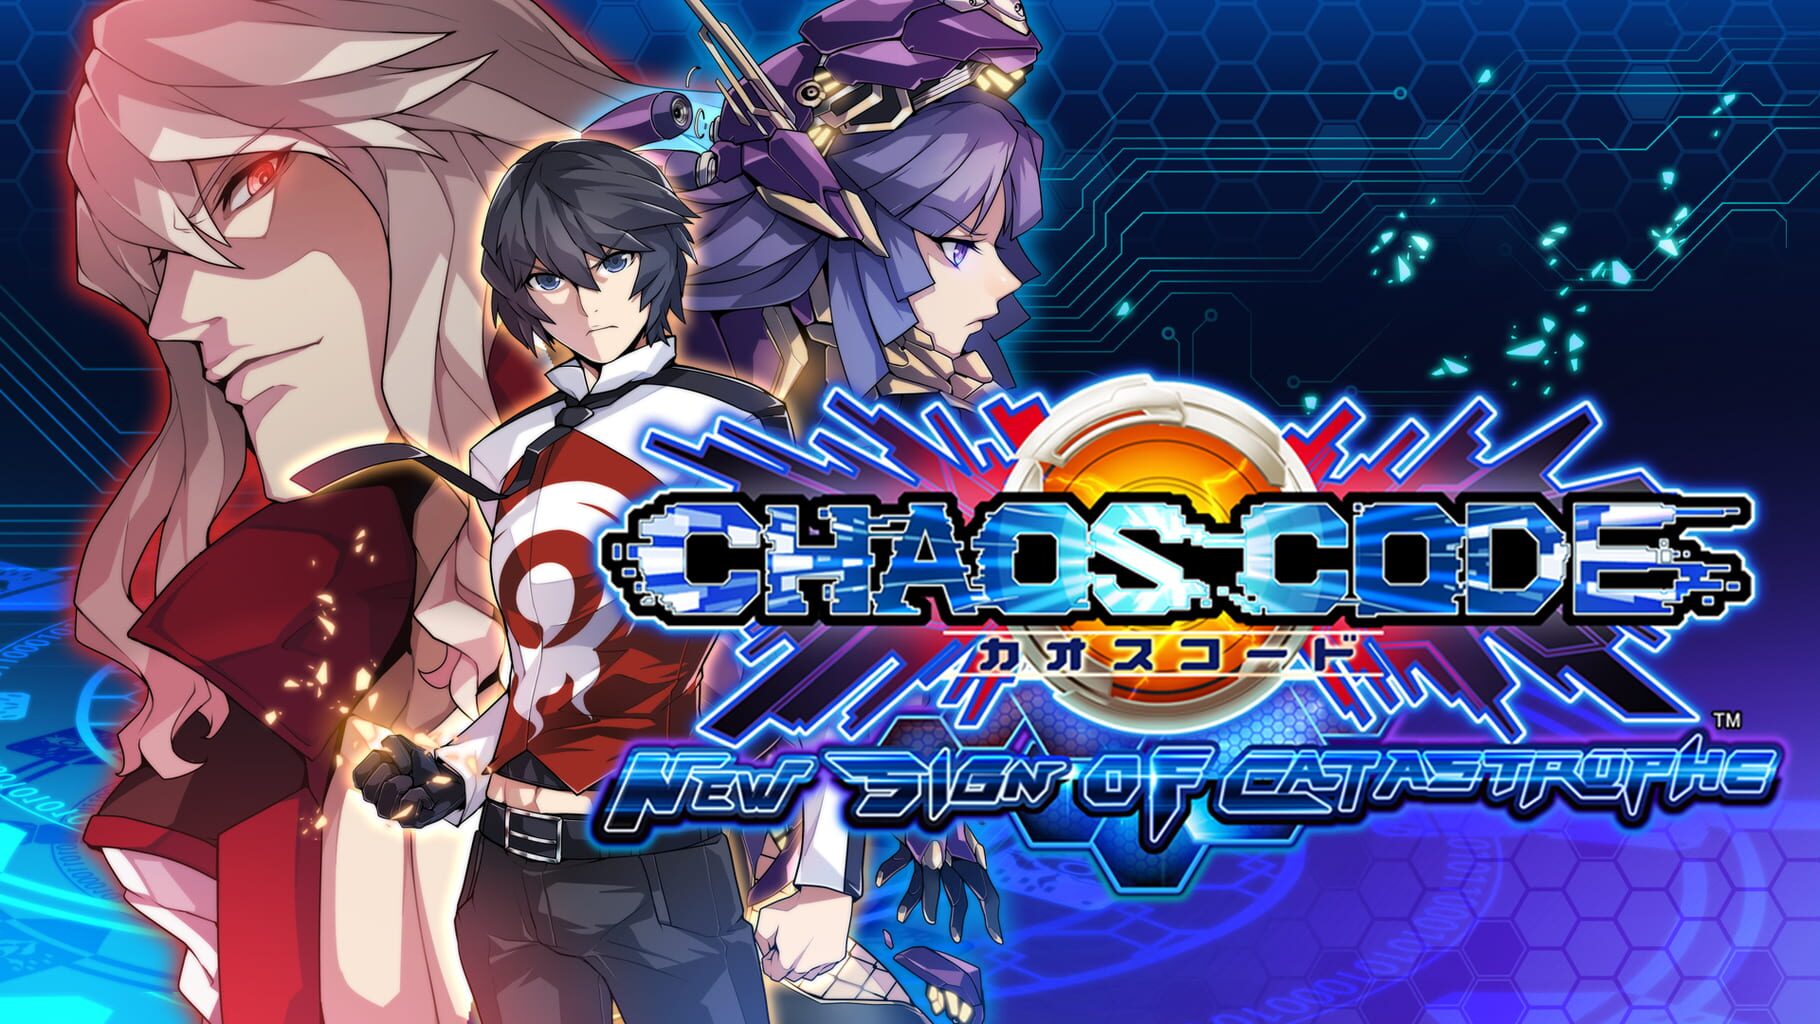 Chaos Code: New Sign of Catastrophe artwork